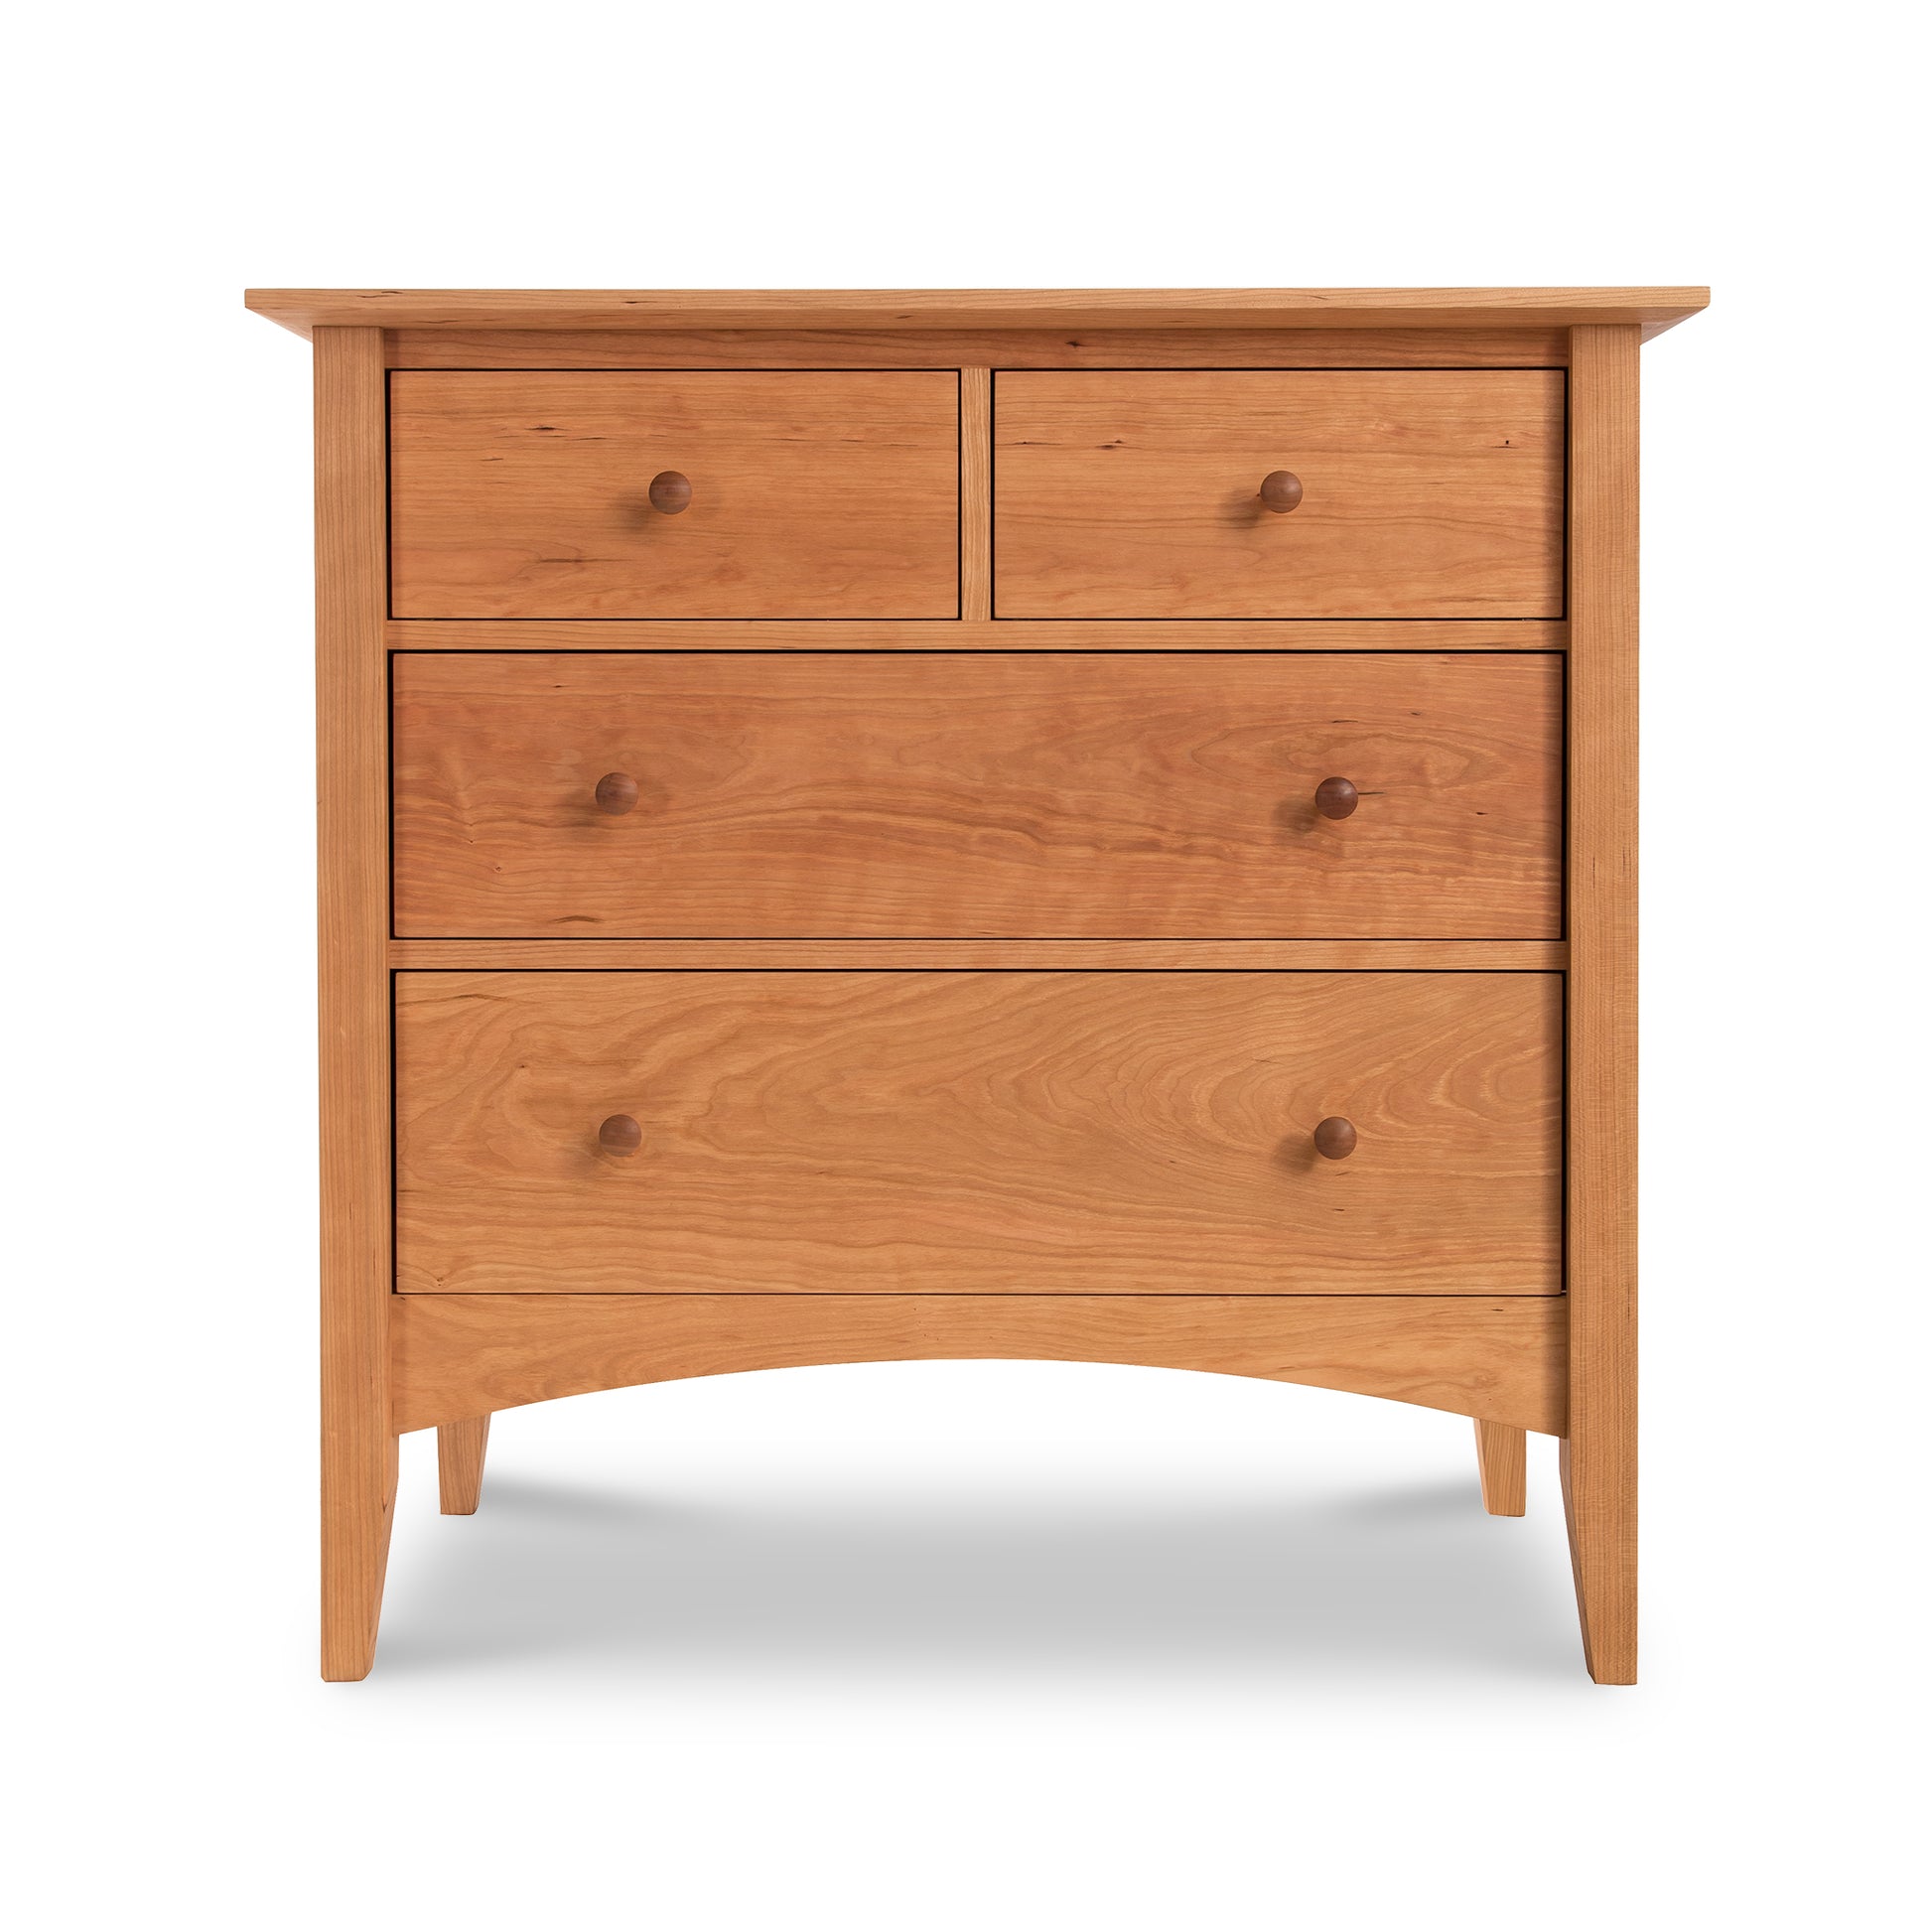 A wooden dresser from the Maple Corner Woodworks American Shaker 4-Drawer Chest, with four drawers: two smaller side-by-side on the top and two larger below. It features round knobs and stands on slightly curved legs.